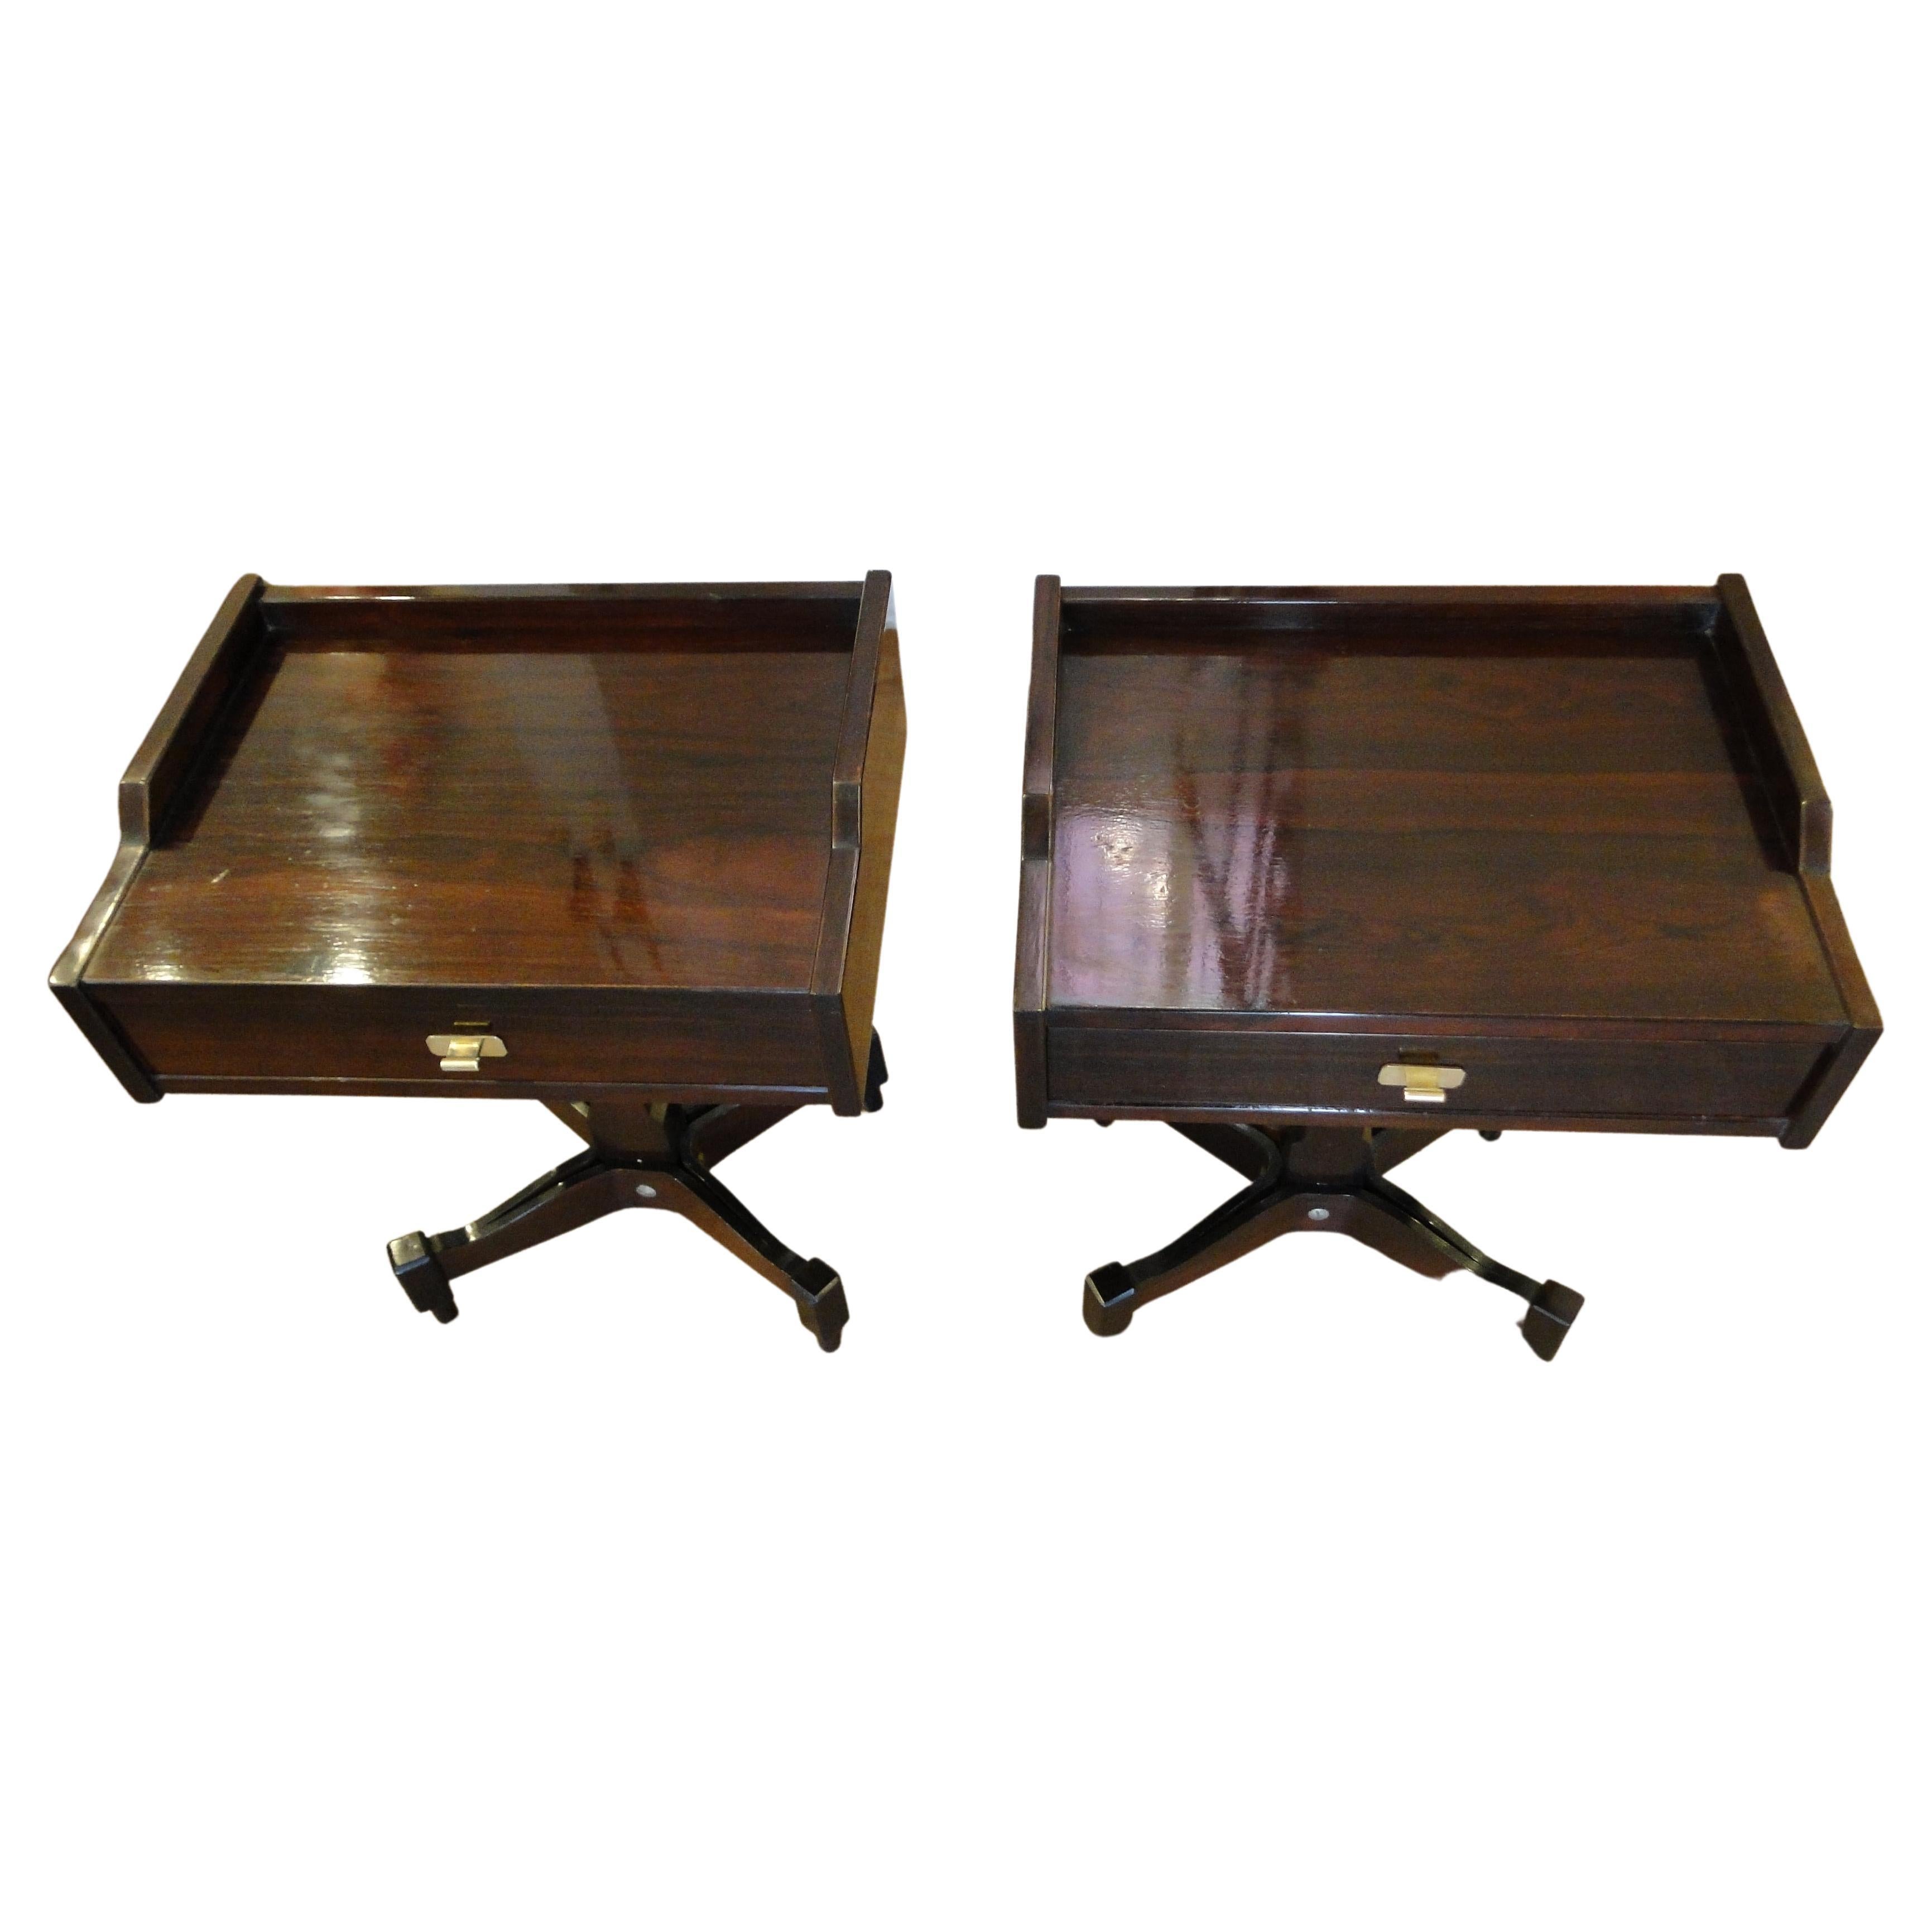 Claudio Salocchi (born in 1934) & Sormani (publisher).

Pair of walnut bedside tables

 thermoformed X base made from short cylinders,

shelf lined with a gallery, frieze drawer, brass handle.
 
Very good condition.